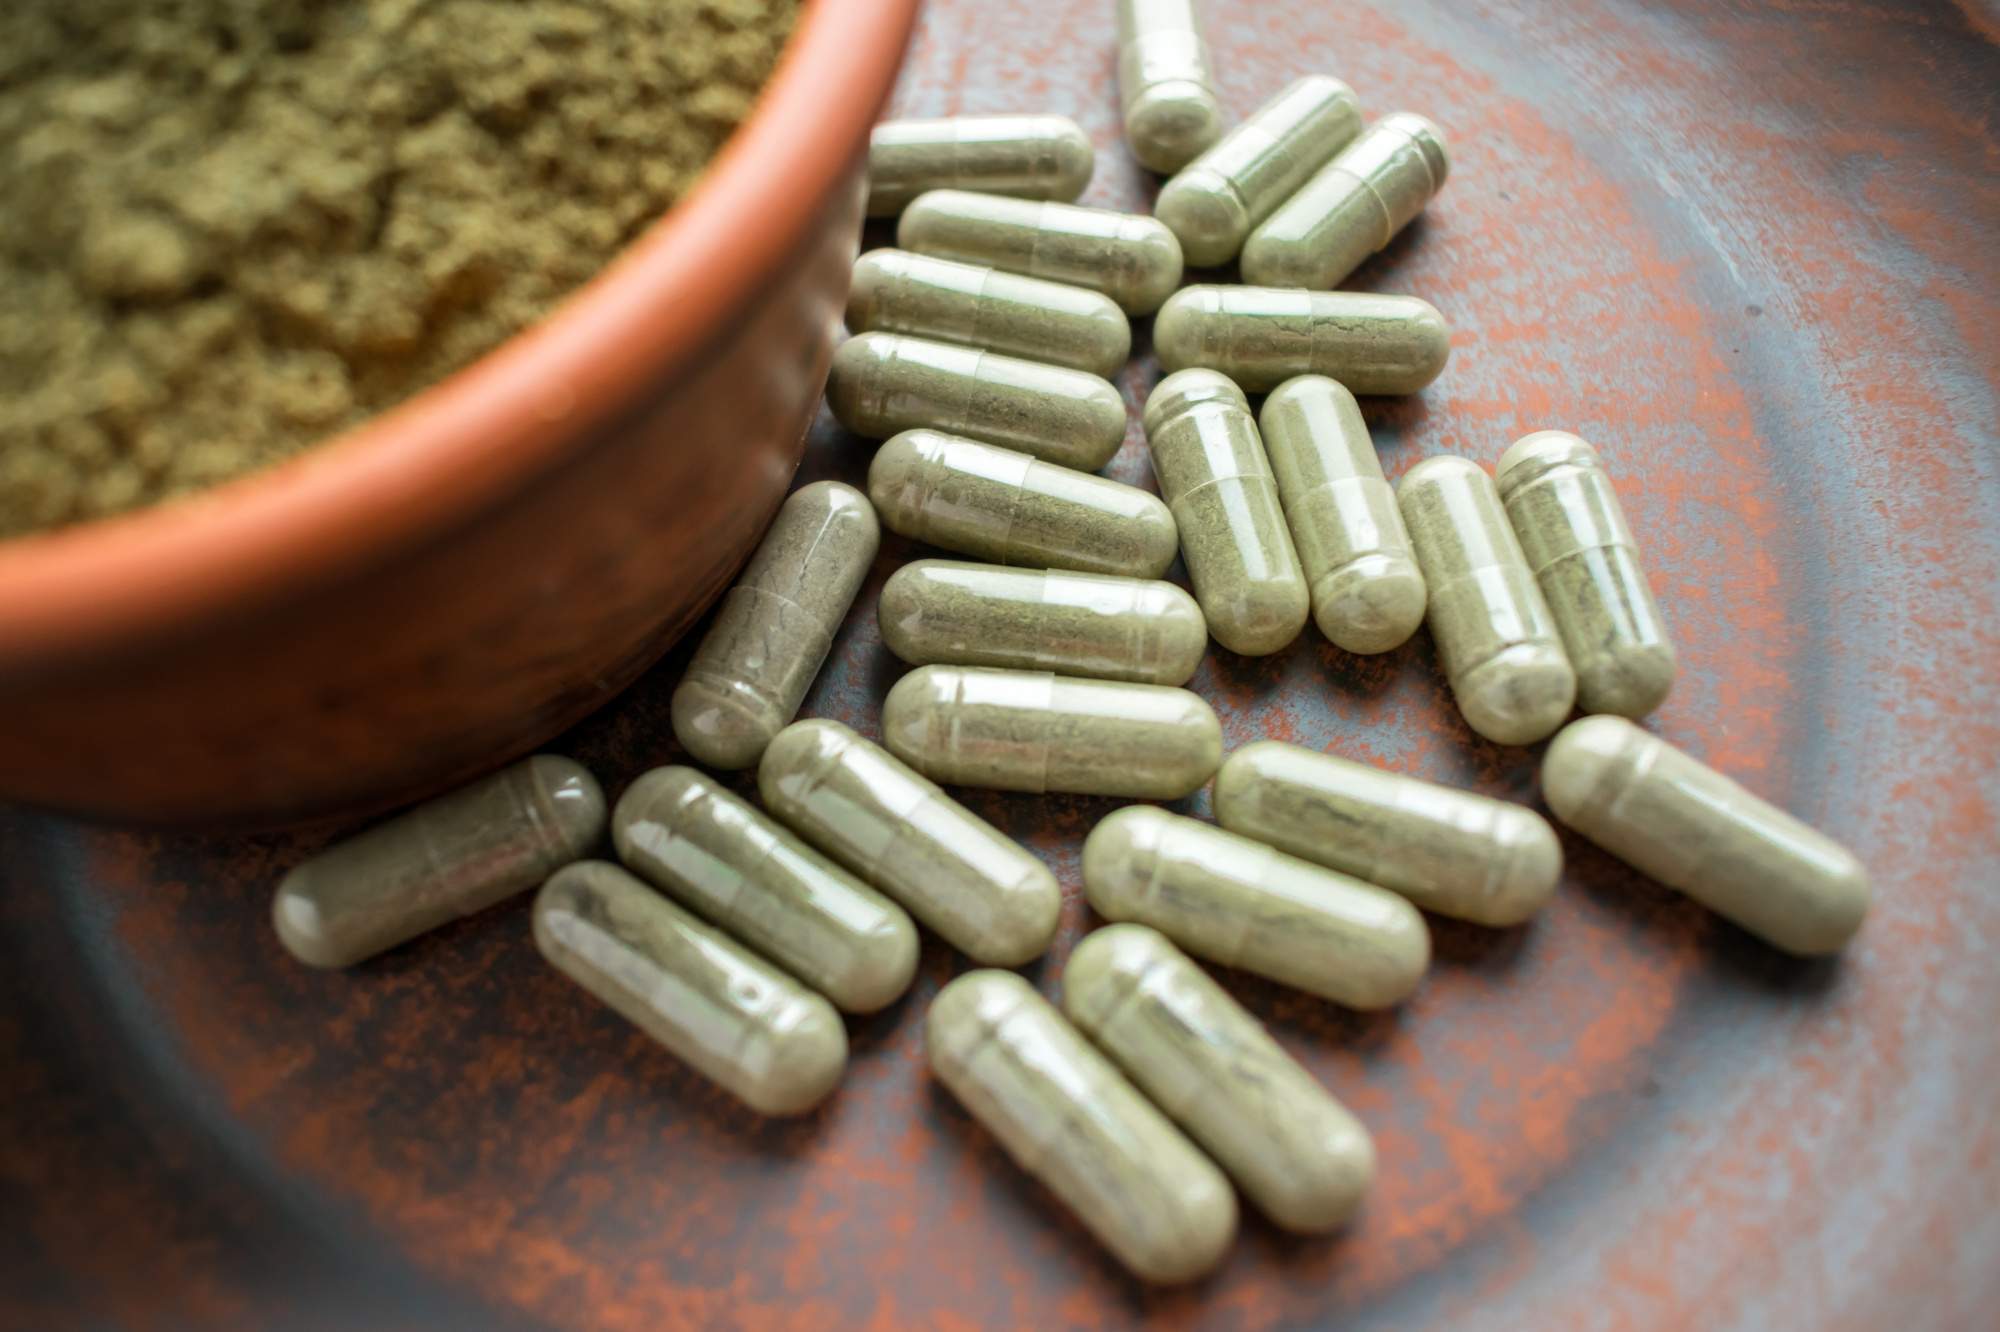 Kratom Extract vs. Powder: What’s the Difference?